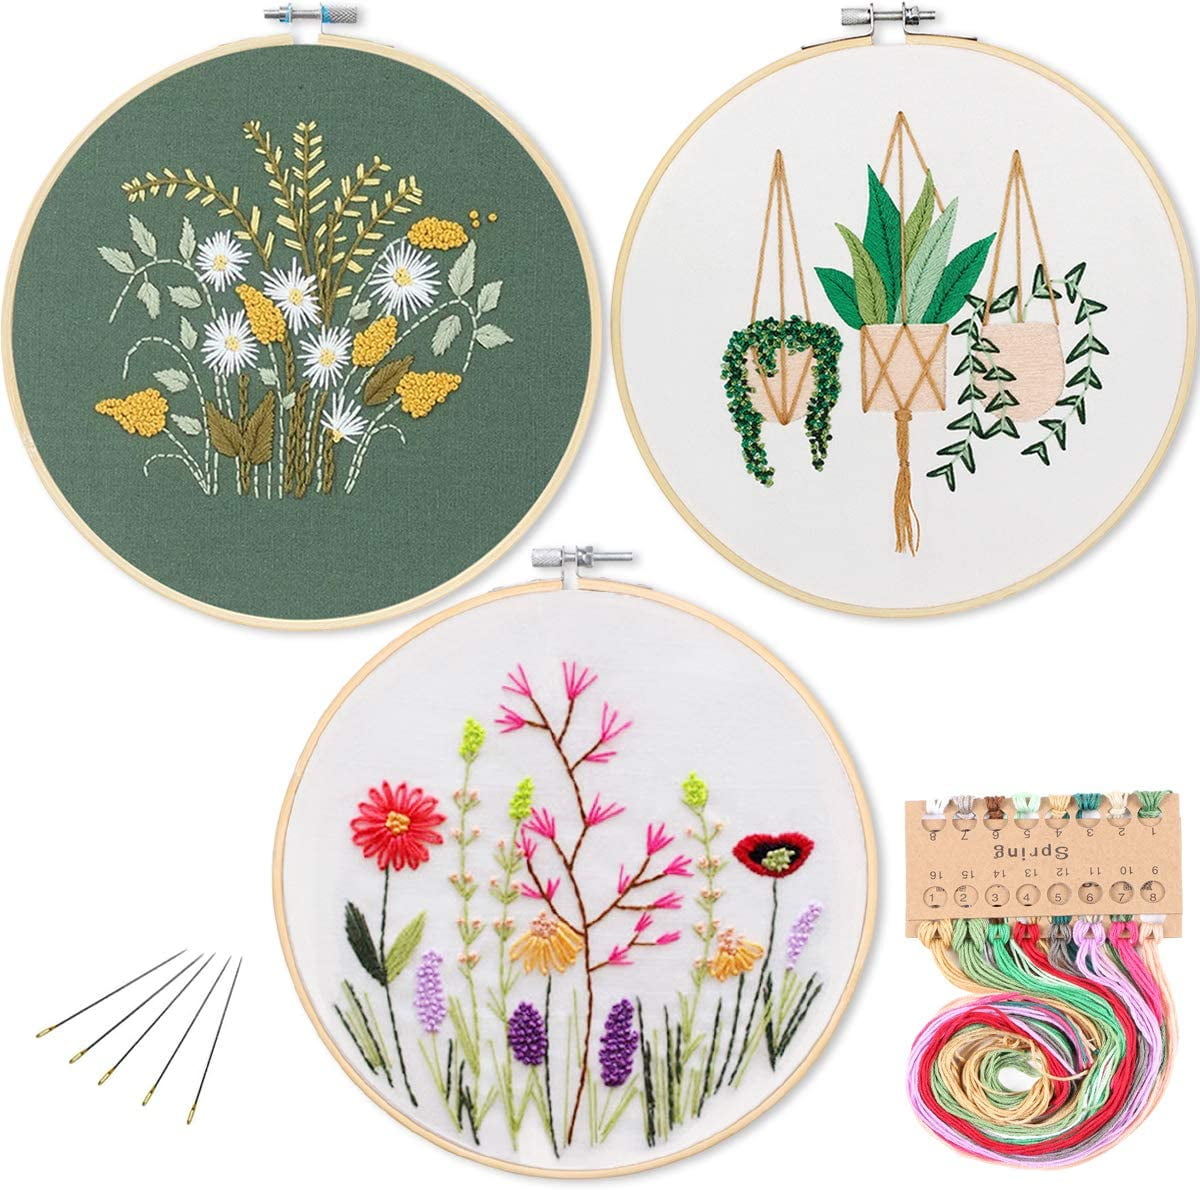 Embroidery Kit for Beginners,Flower Embroidery Starter Kits Modern Floral Stitching Set DIY Plant Craft Gift with Clothes 3 Pack Floral Instructions,Hoops,Needles and Color Threads for Adults Kids 